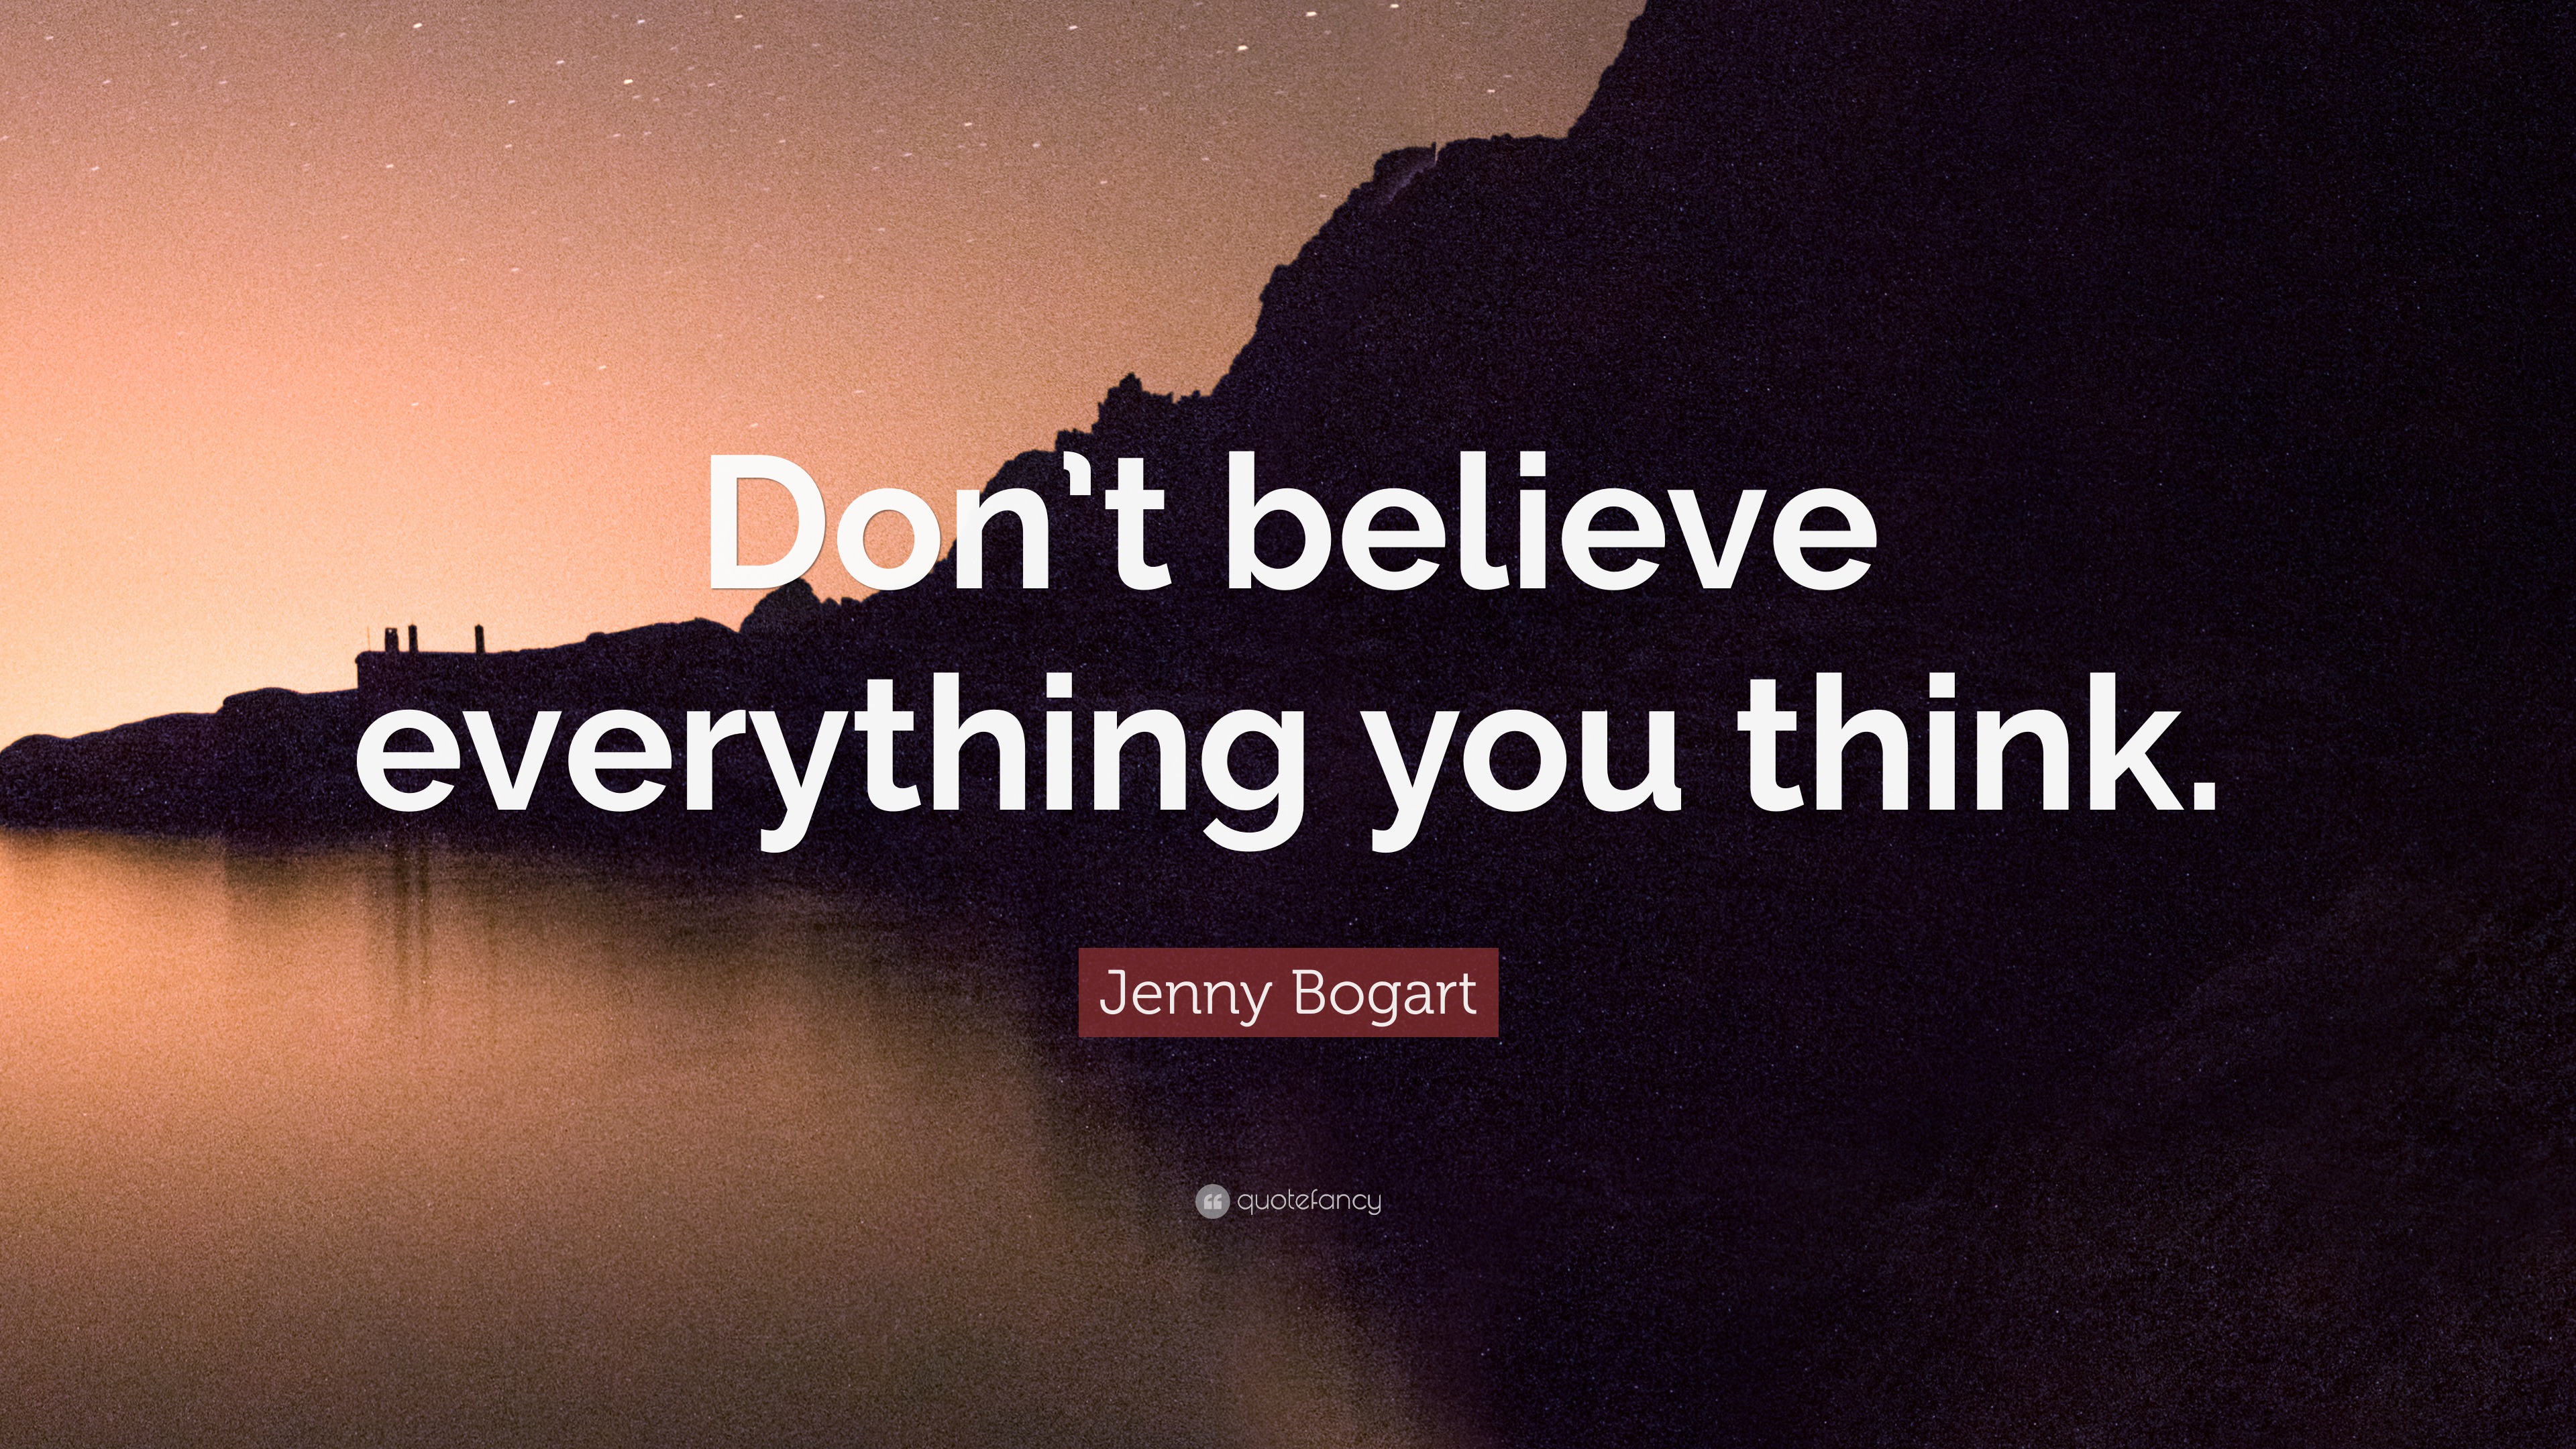 Jenny Bogart Quote “Don t believe everything you think ”